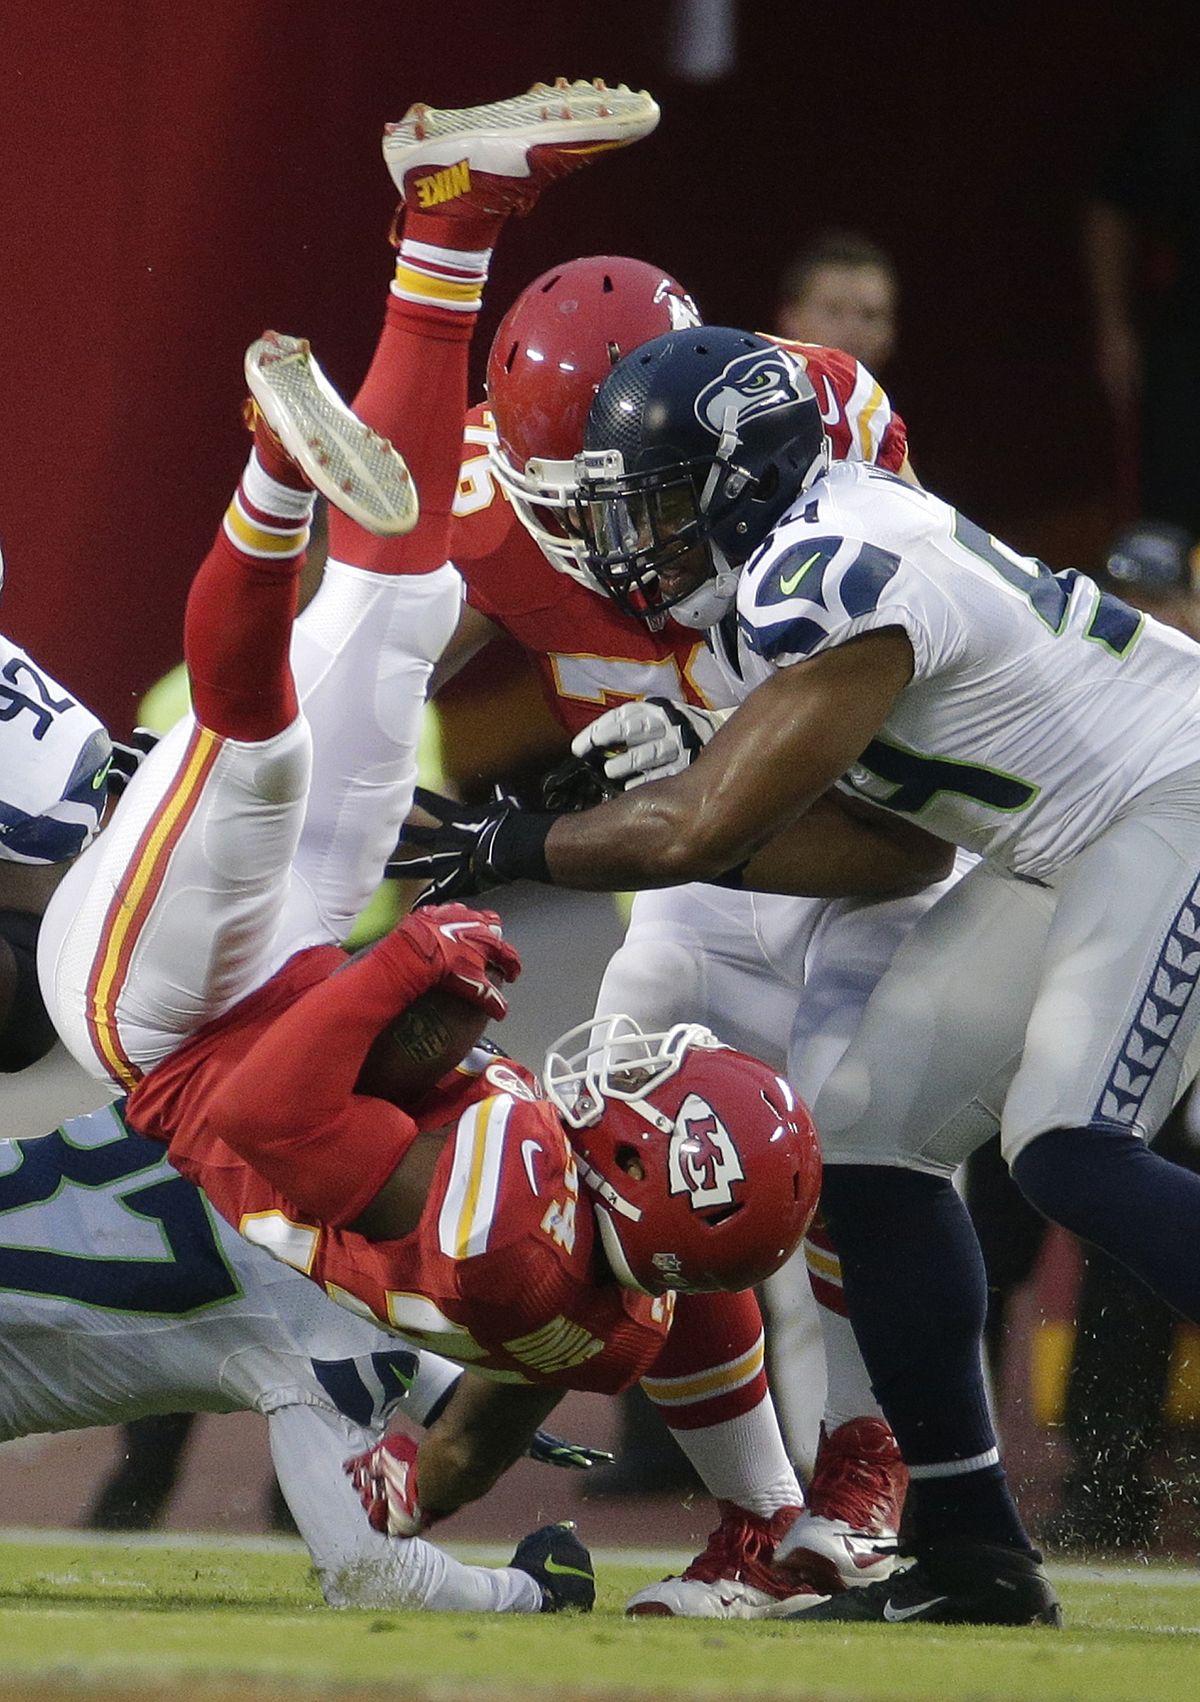 Kansas City Chiefs running back Knile Davis (34) is upended by Seattle Seahawks free safety Dion Bailey (37) and linebacker Bobby Wagner (54) during the first half. (AP)